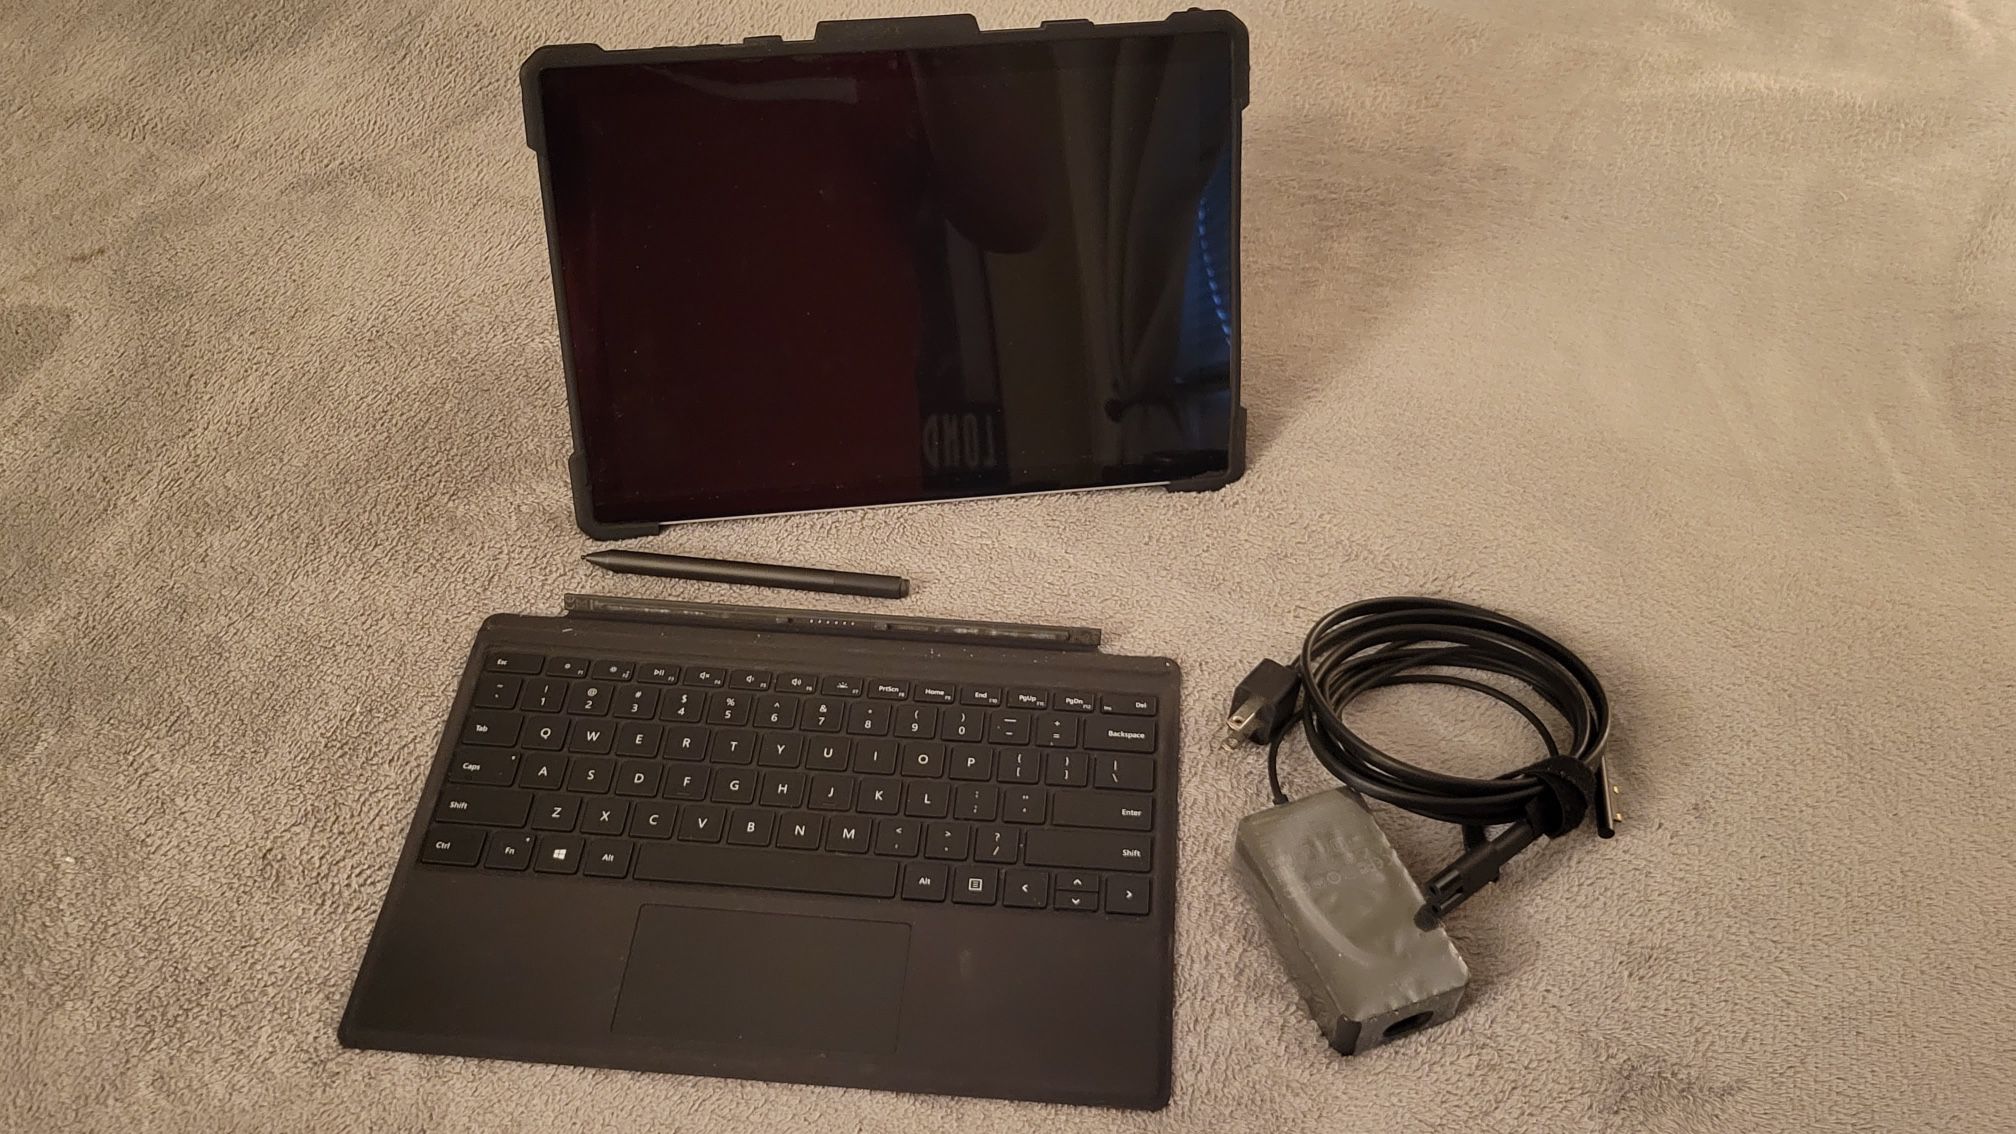 Microsoft Surface Pro 7 with Accessories